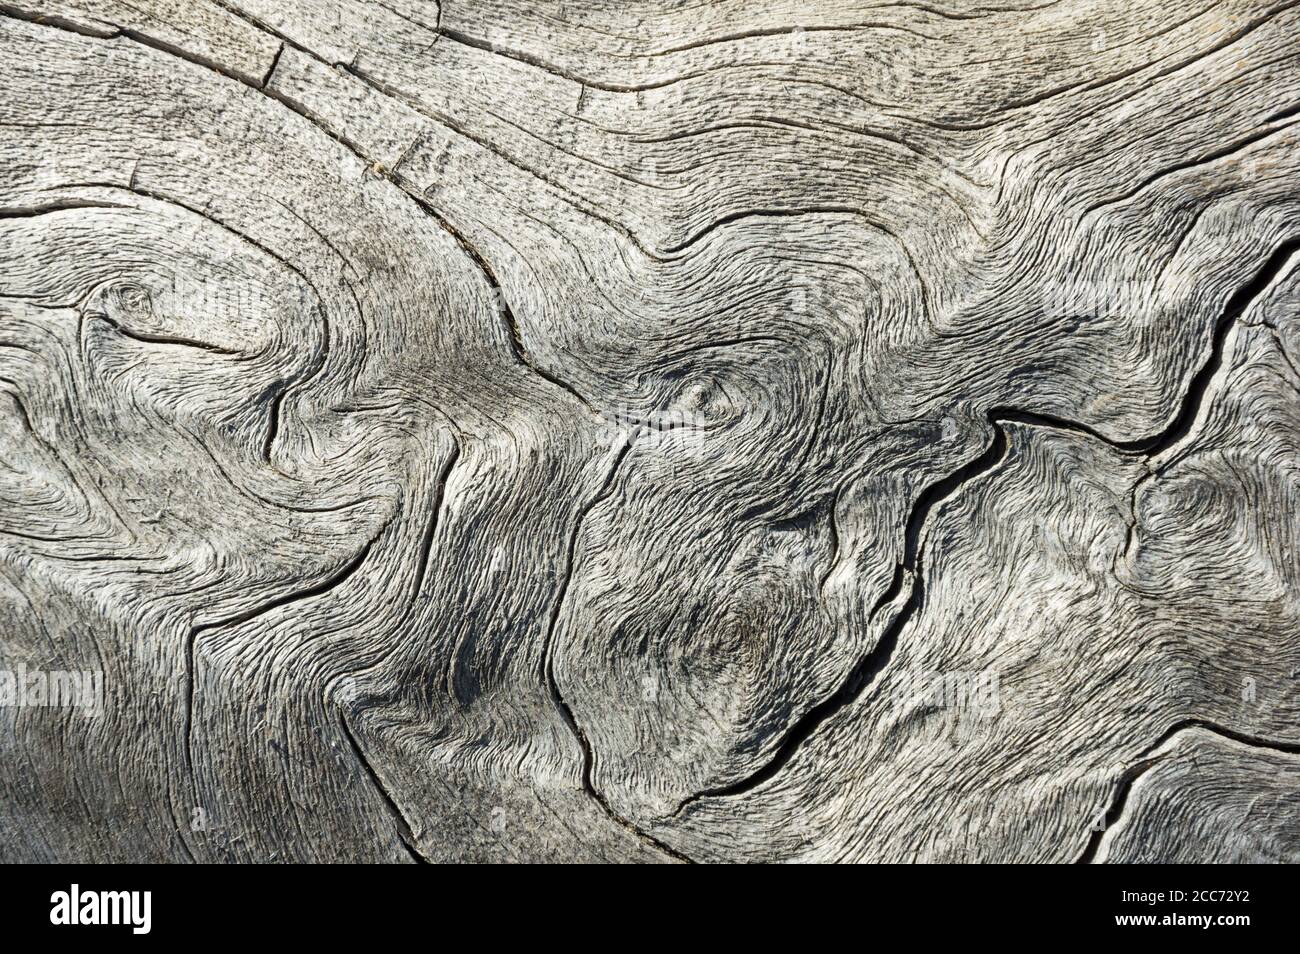 contorted and weathered gray wood background texture image Stock Photo